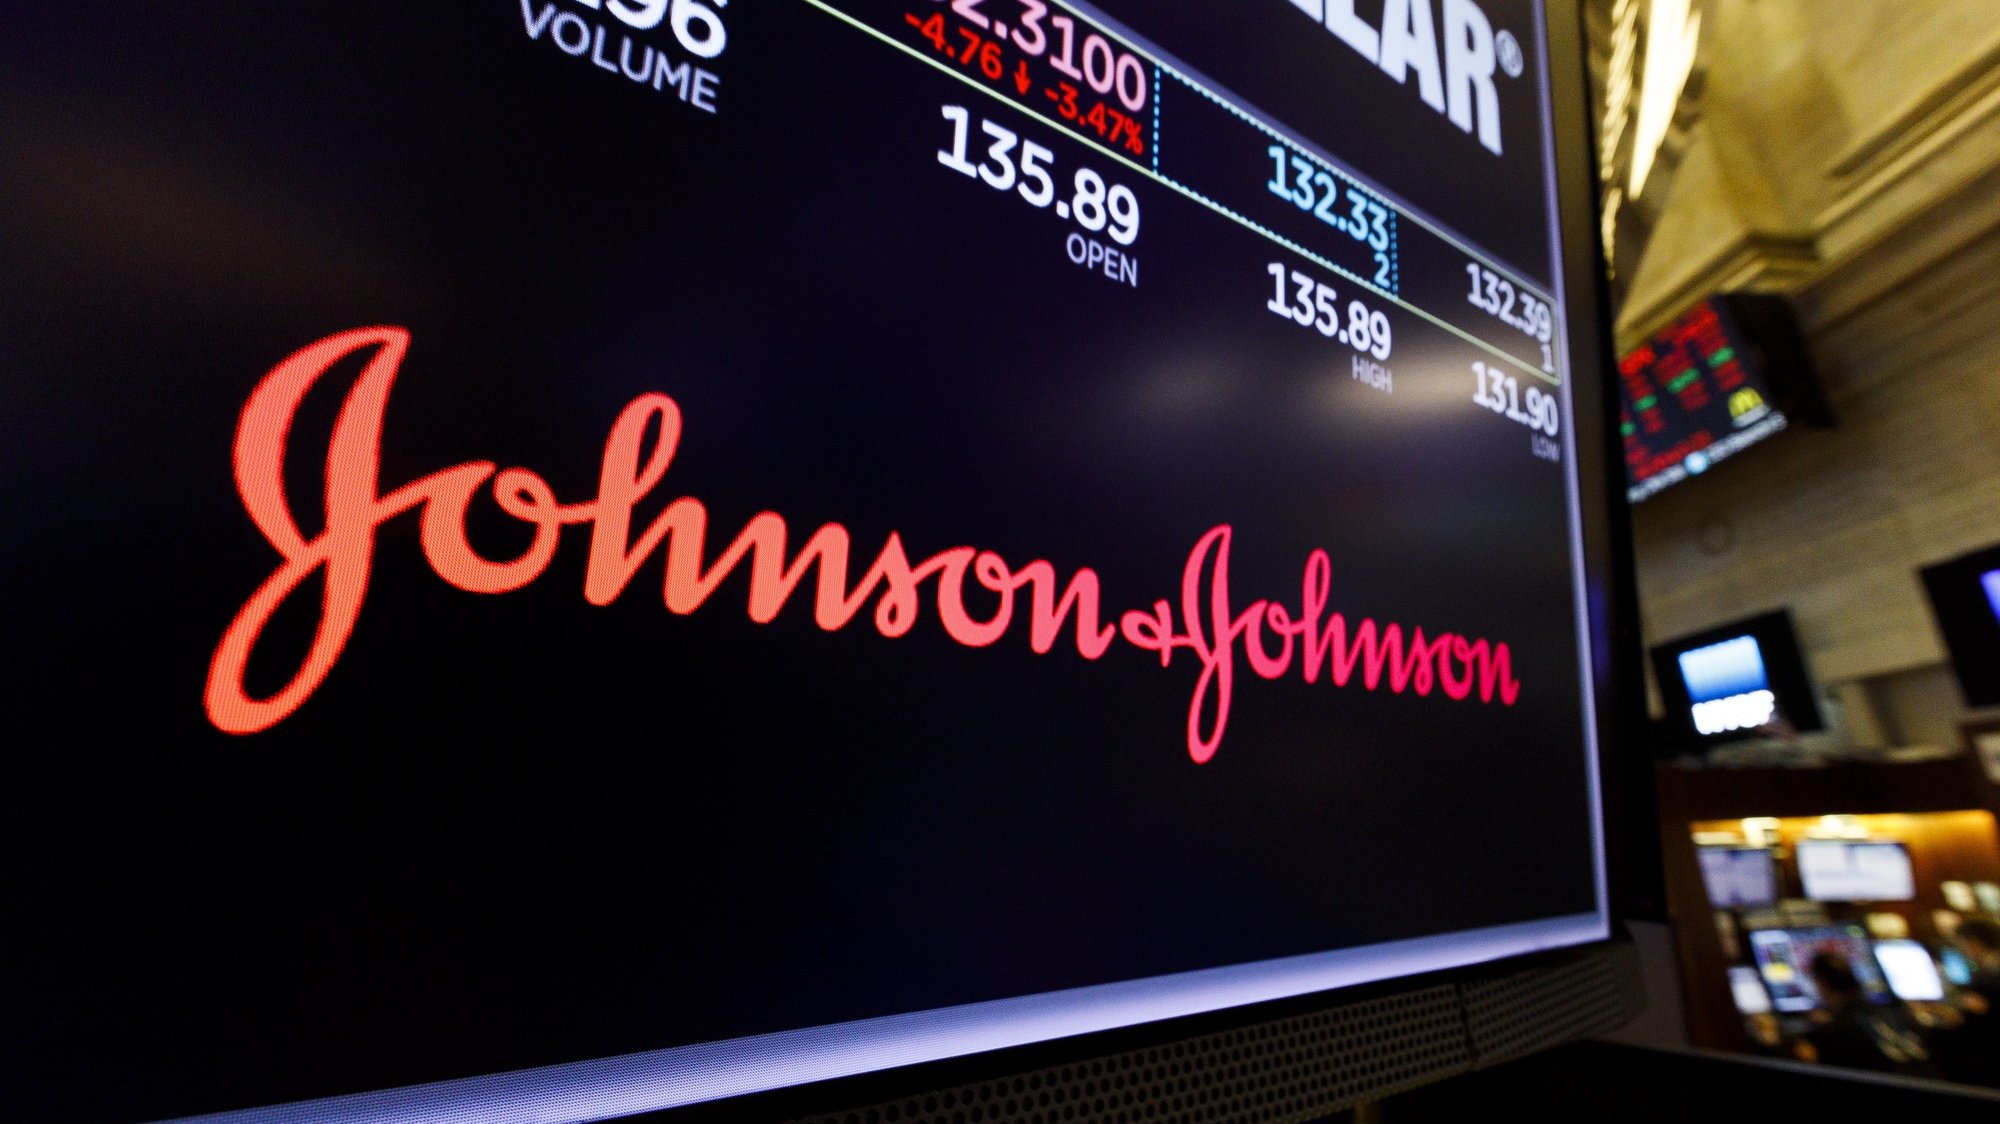 epa08963652 (FILE) - A screen shows the logo for the pharmaceutical company Johnson and Johnson on the floor of the New York Stock Exchange in New York, New York, USA, 29 May 2019 (reissued 25 January 2021). Johnson and Johnson is to publish their 4th quarter 2020 results on 26 January 2021.  EPA/JUSTIN LANE *** Local Caption *** 55233447